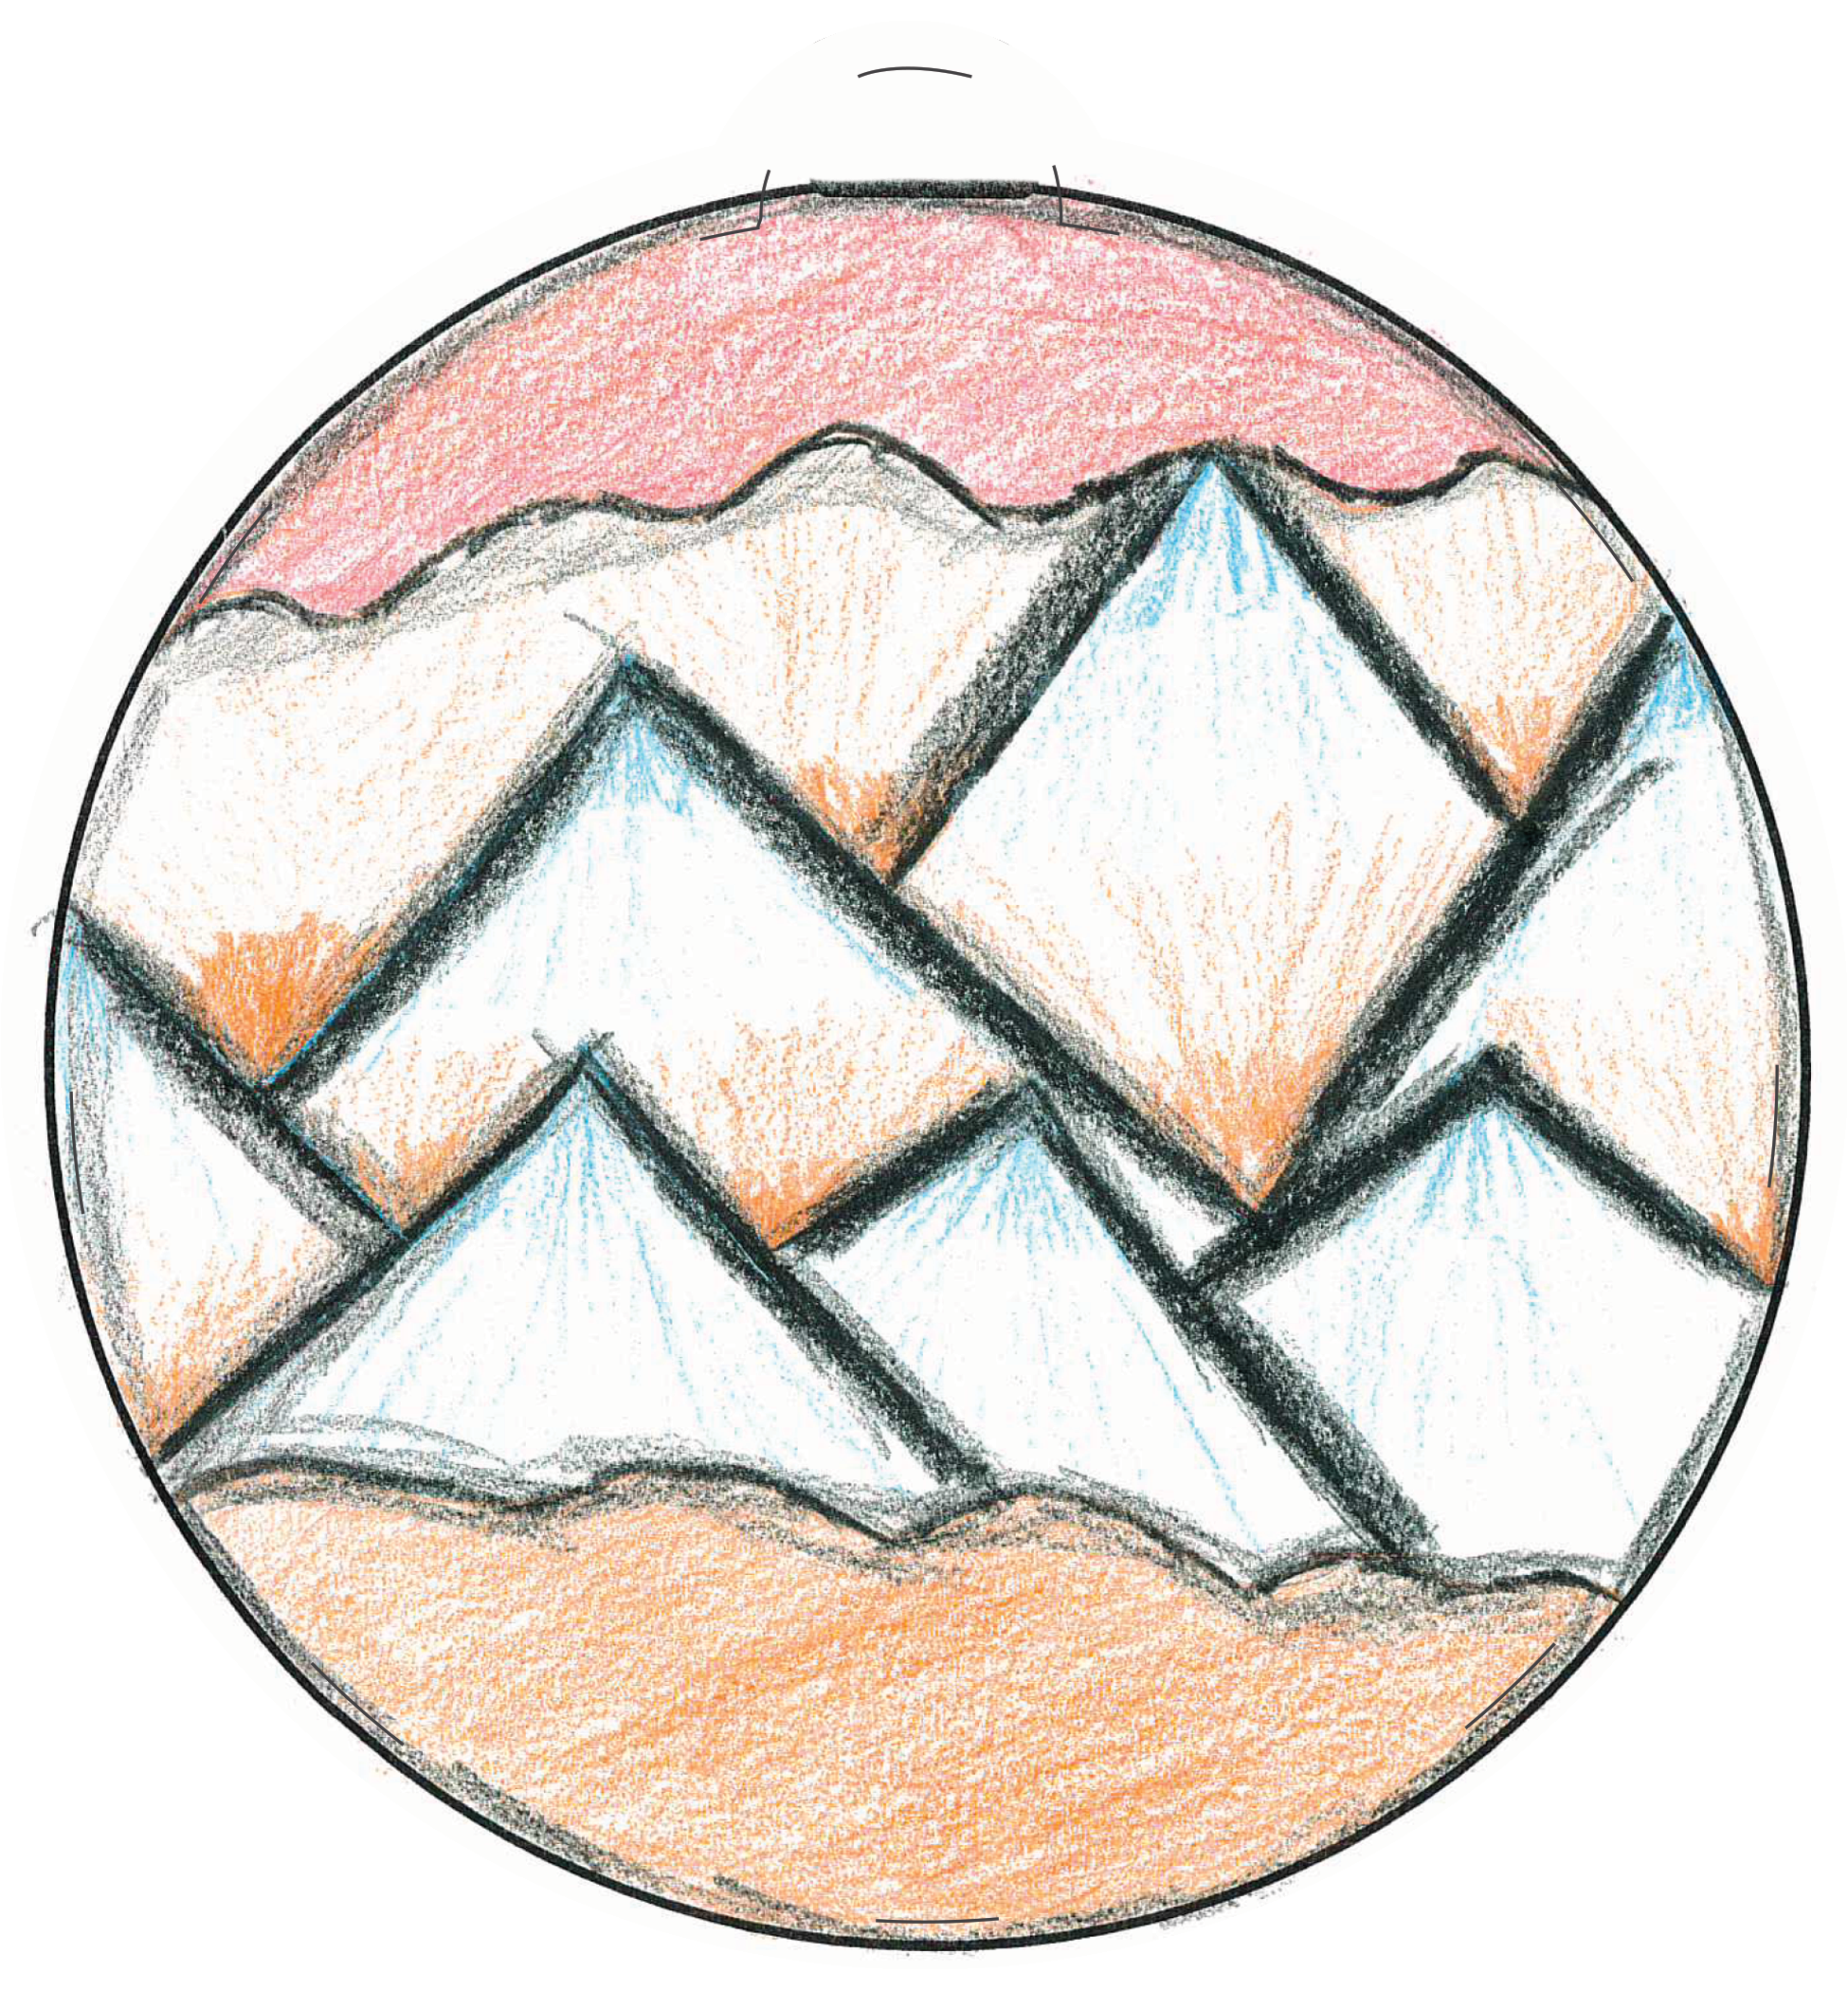 Ornament depicting mountains in a desert